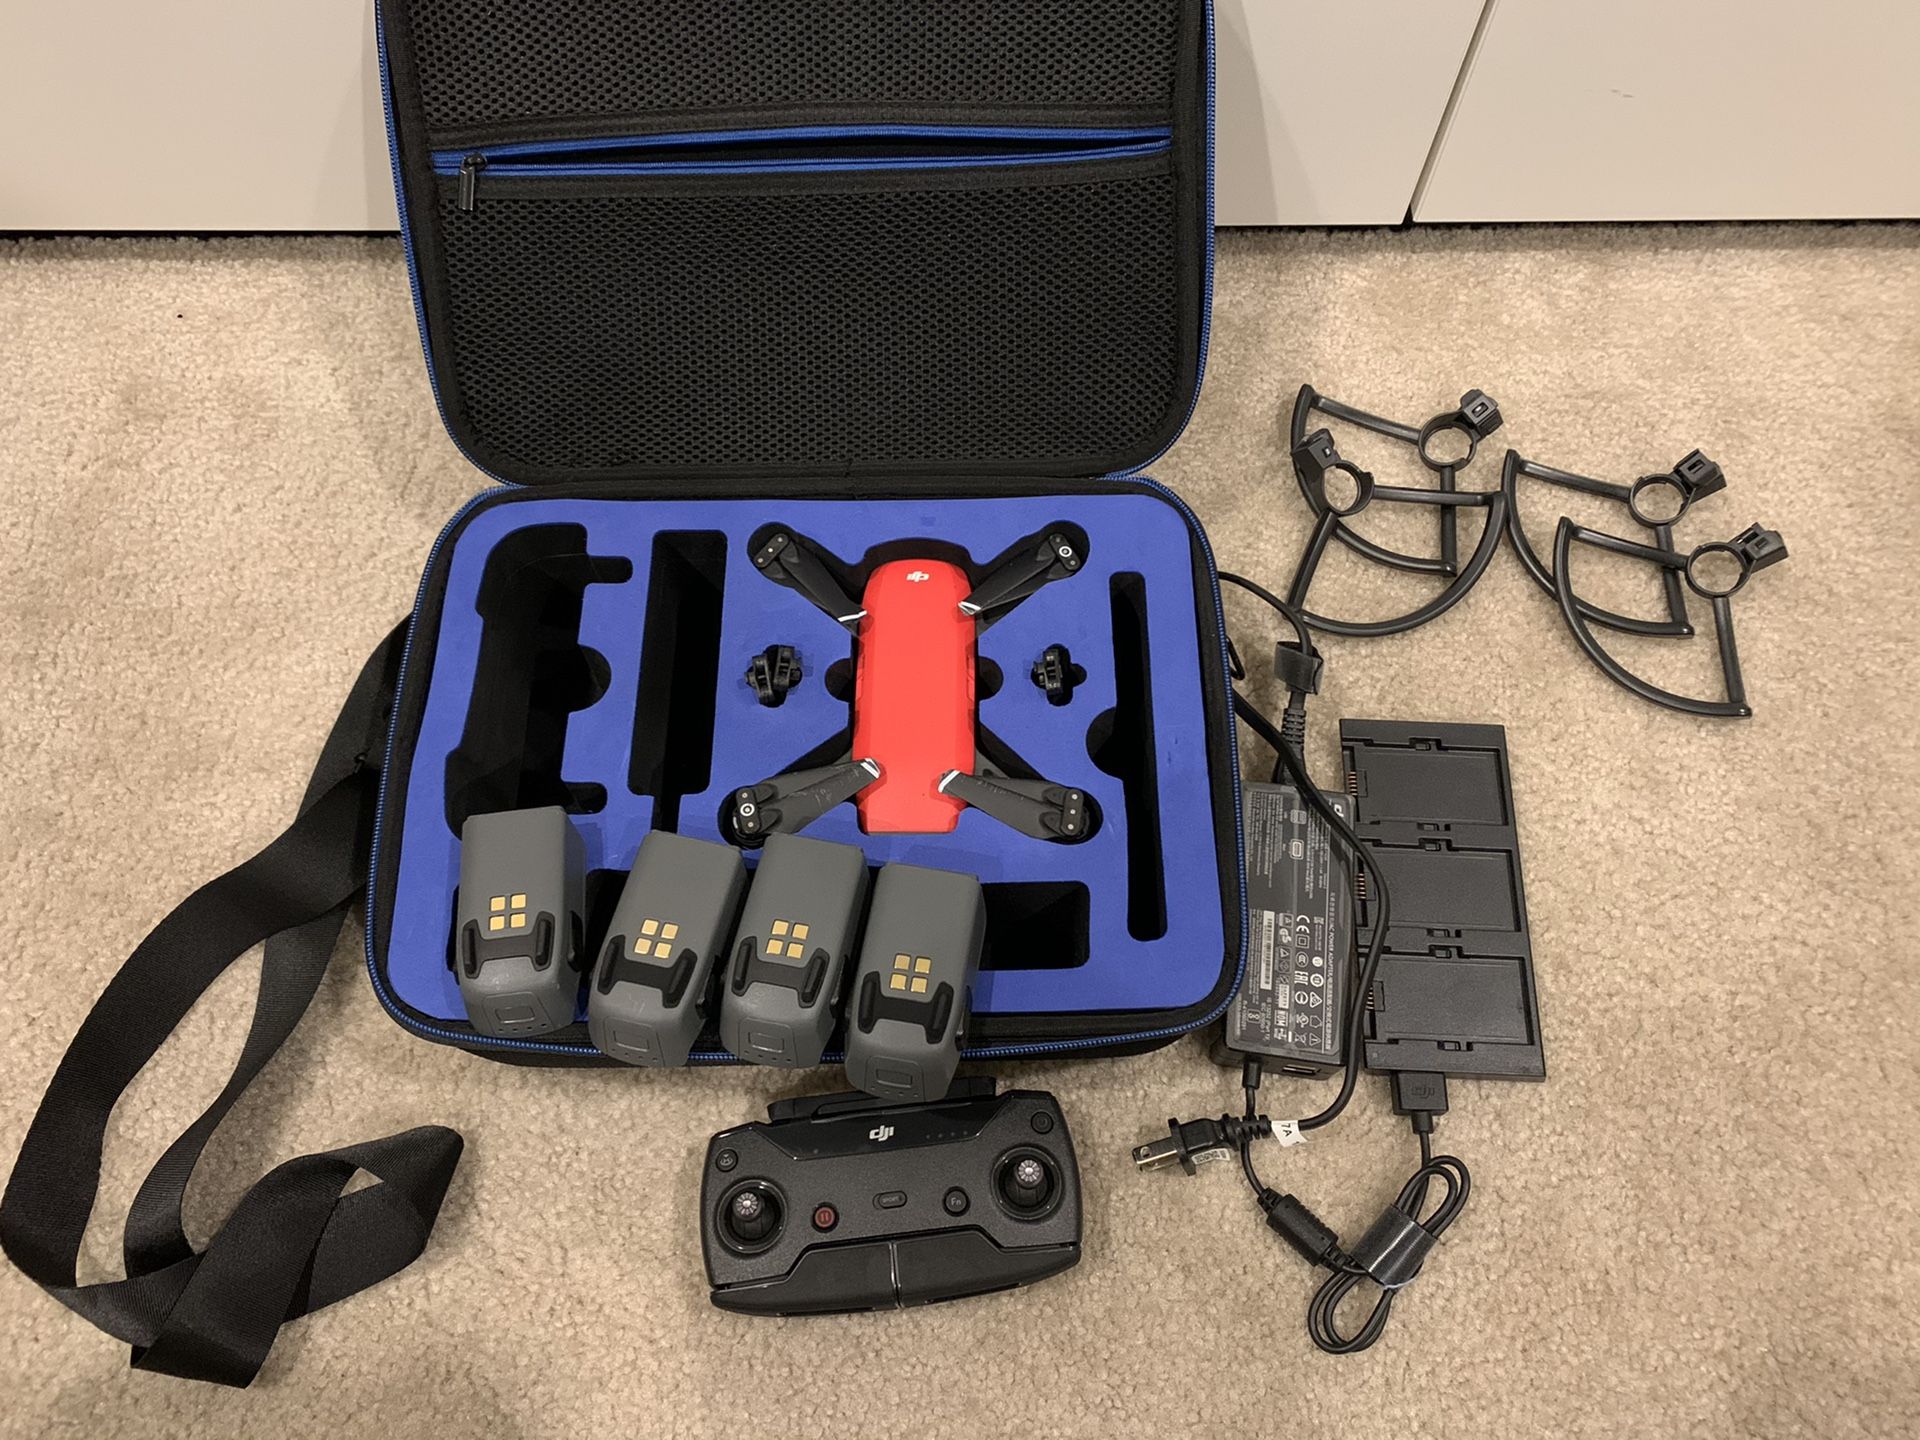 DJI Spark drone Red fully loaded like new condition